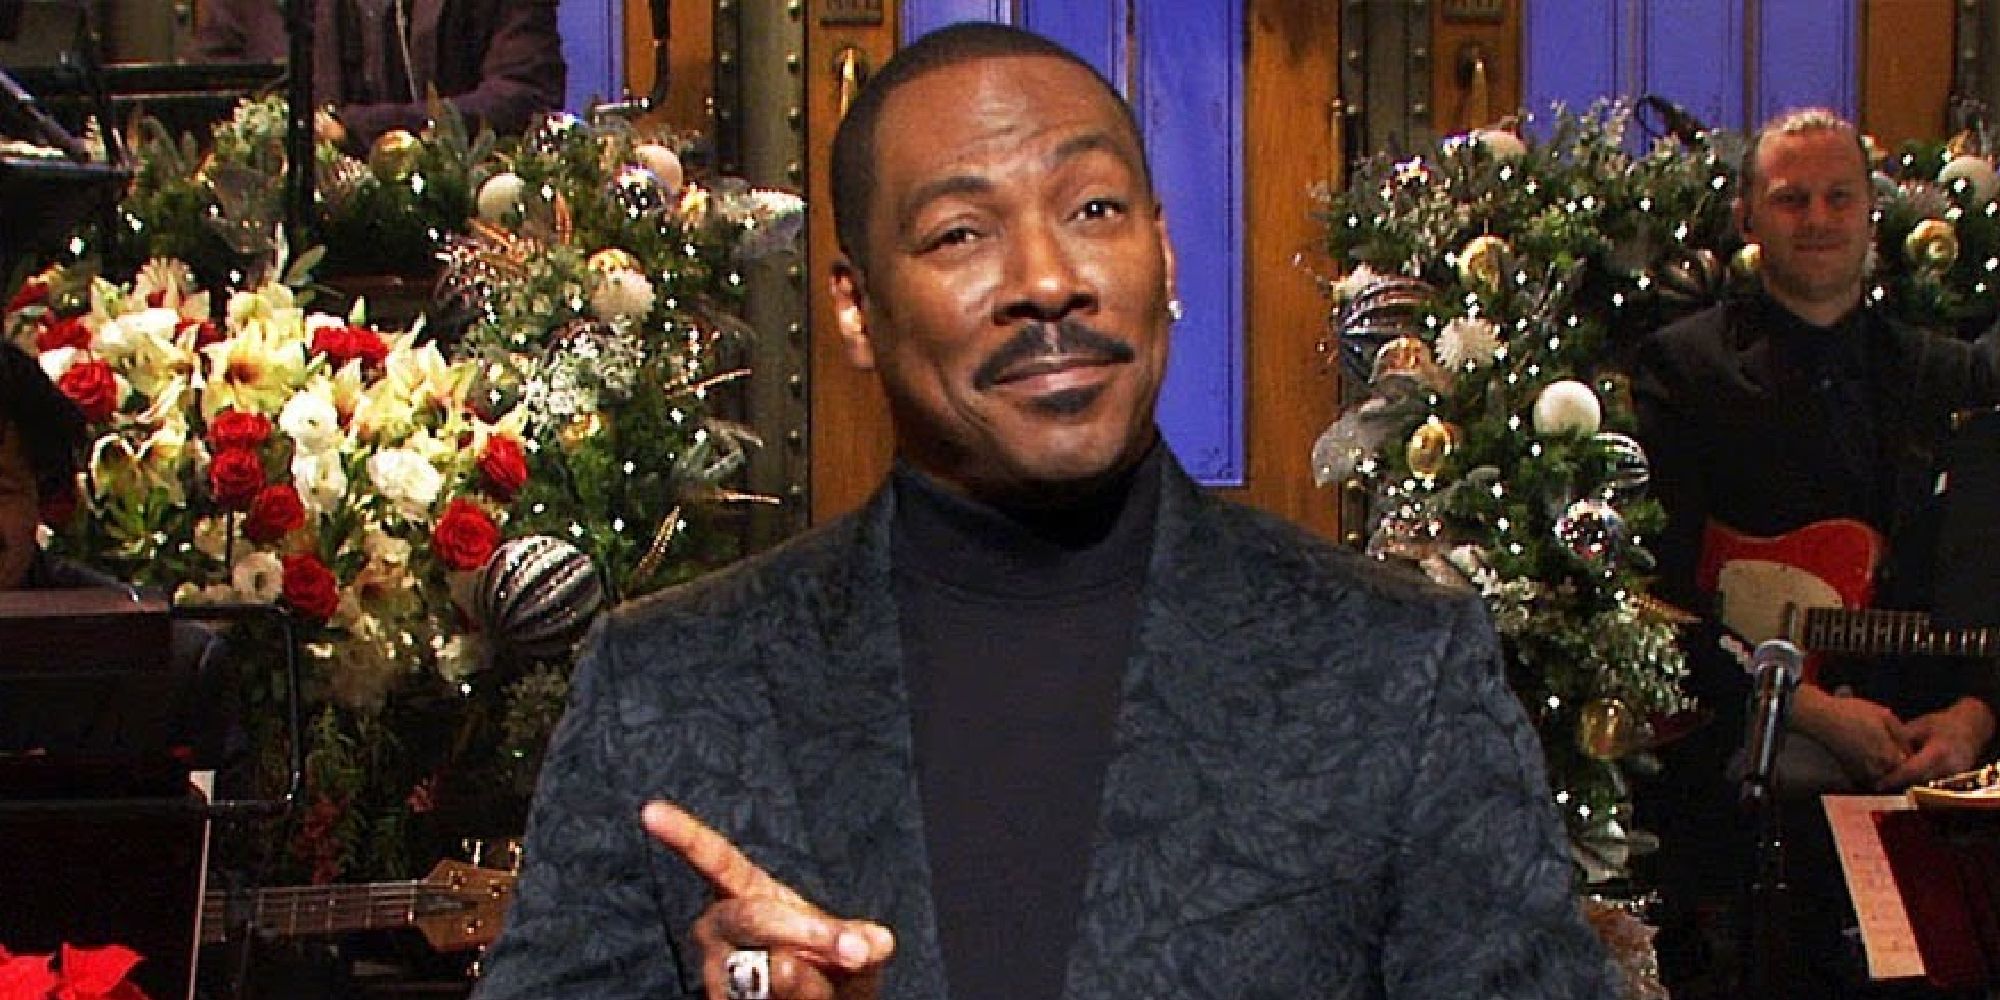 Eddie Murphy appearing during his monologue in 2019